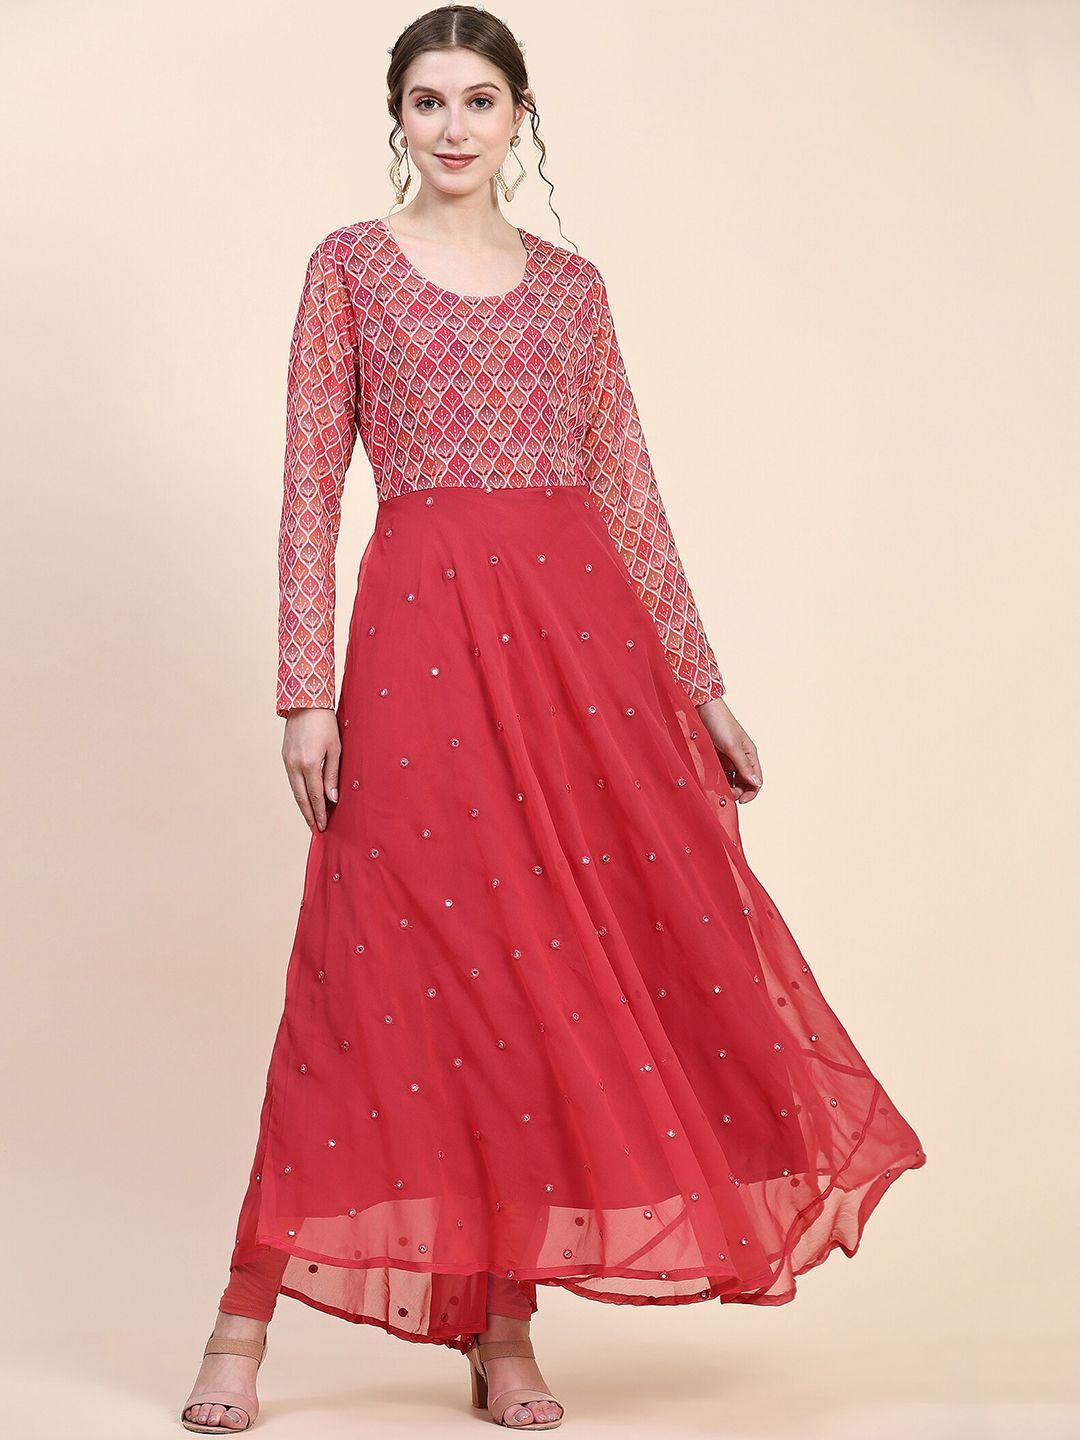 kalini-ethnic-motif-embroidered-maxi-length-pure-georgette-ethnic-dress-with-dupatta